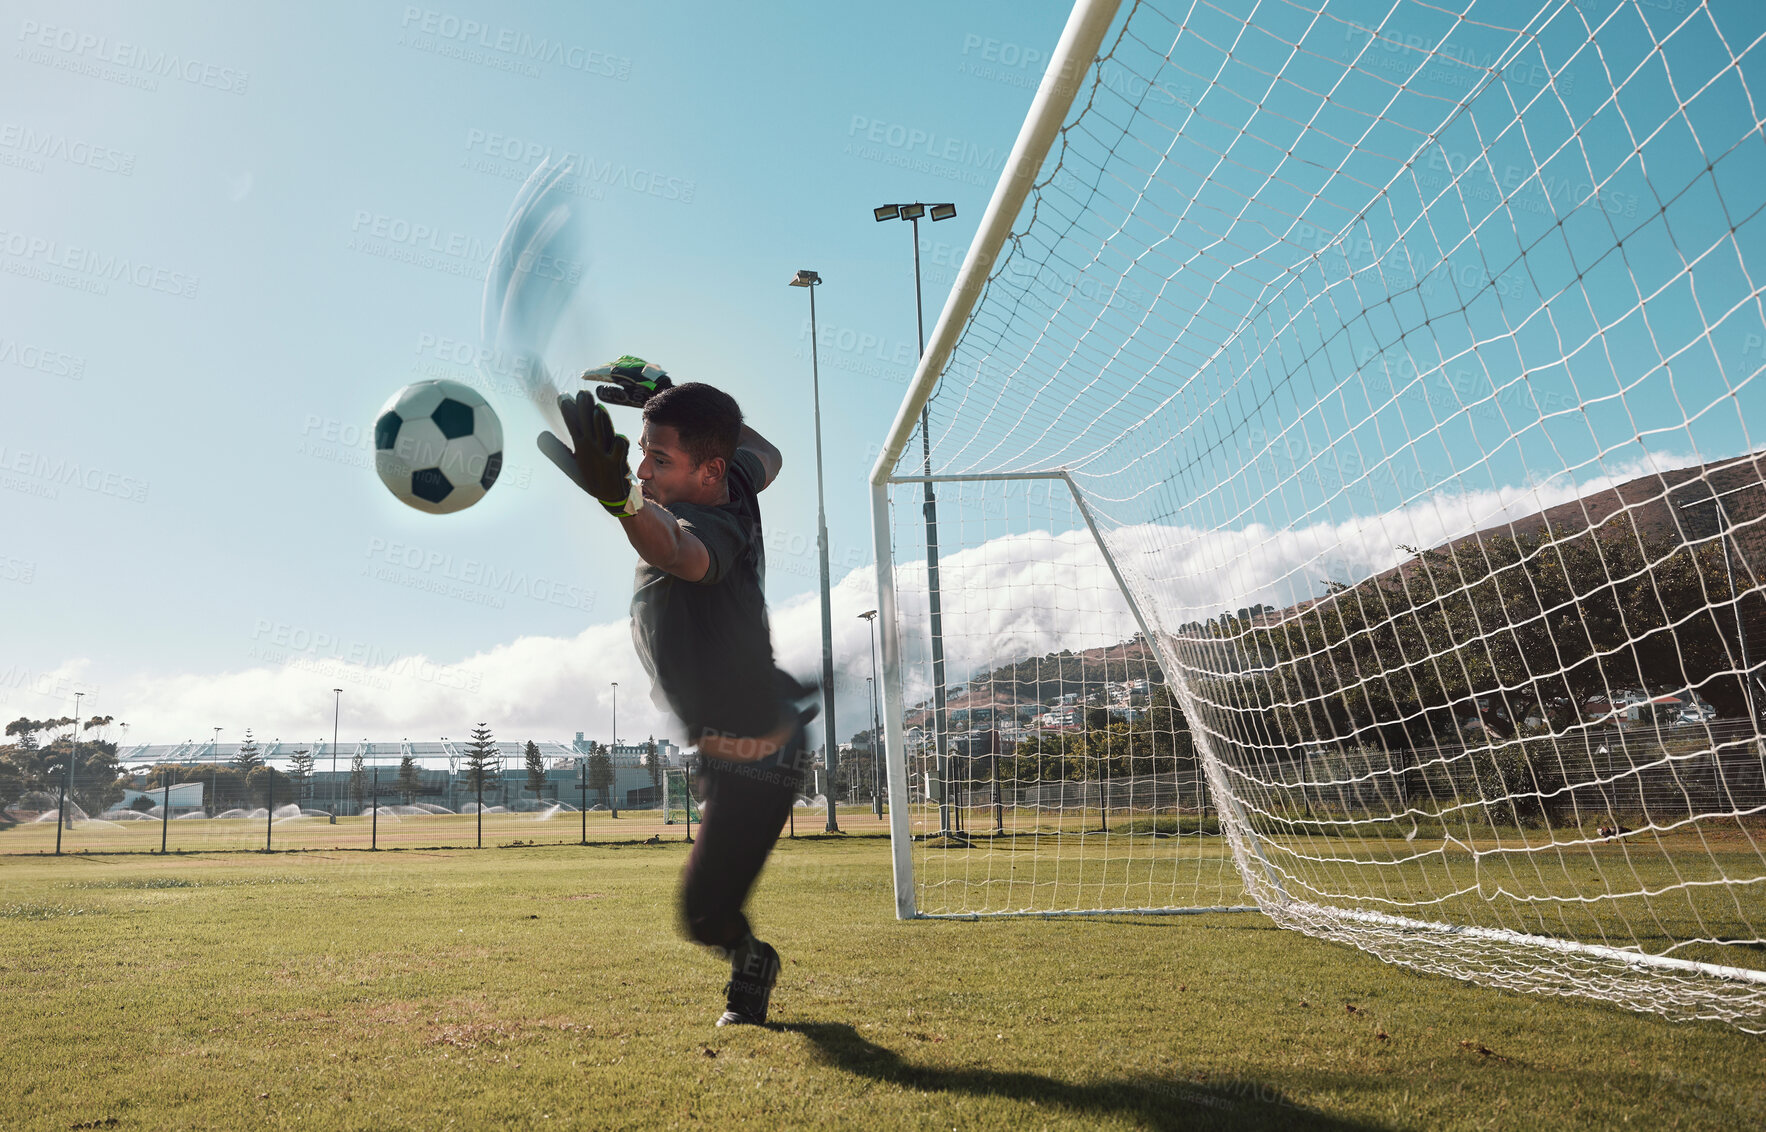 Buy stock photo Goalkeeper, soccer and man jumping for the ball to save the goals by the score post at an outdoor field. Fitness, football and healthy male goalie playing or training with energy for the sports game.